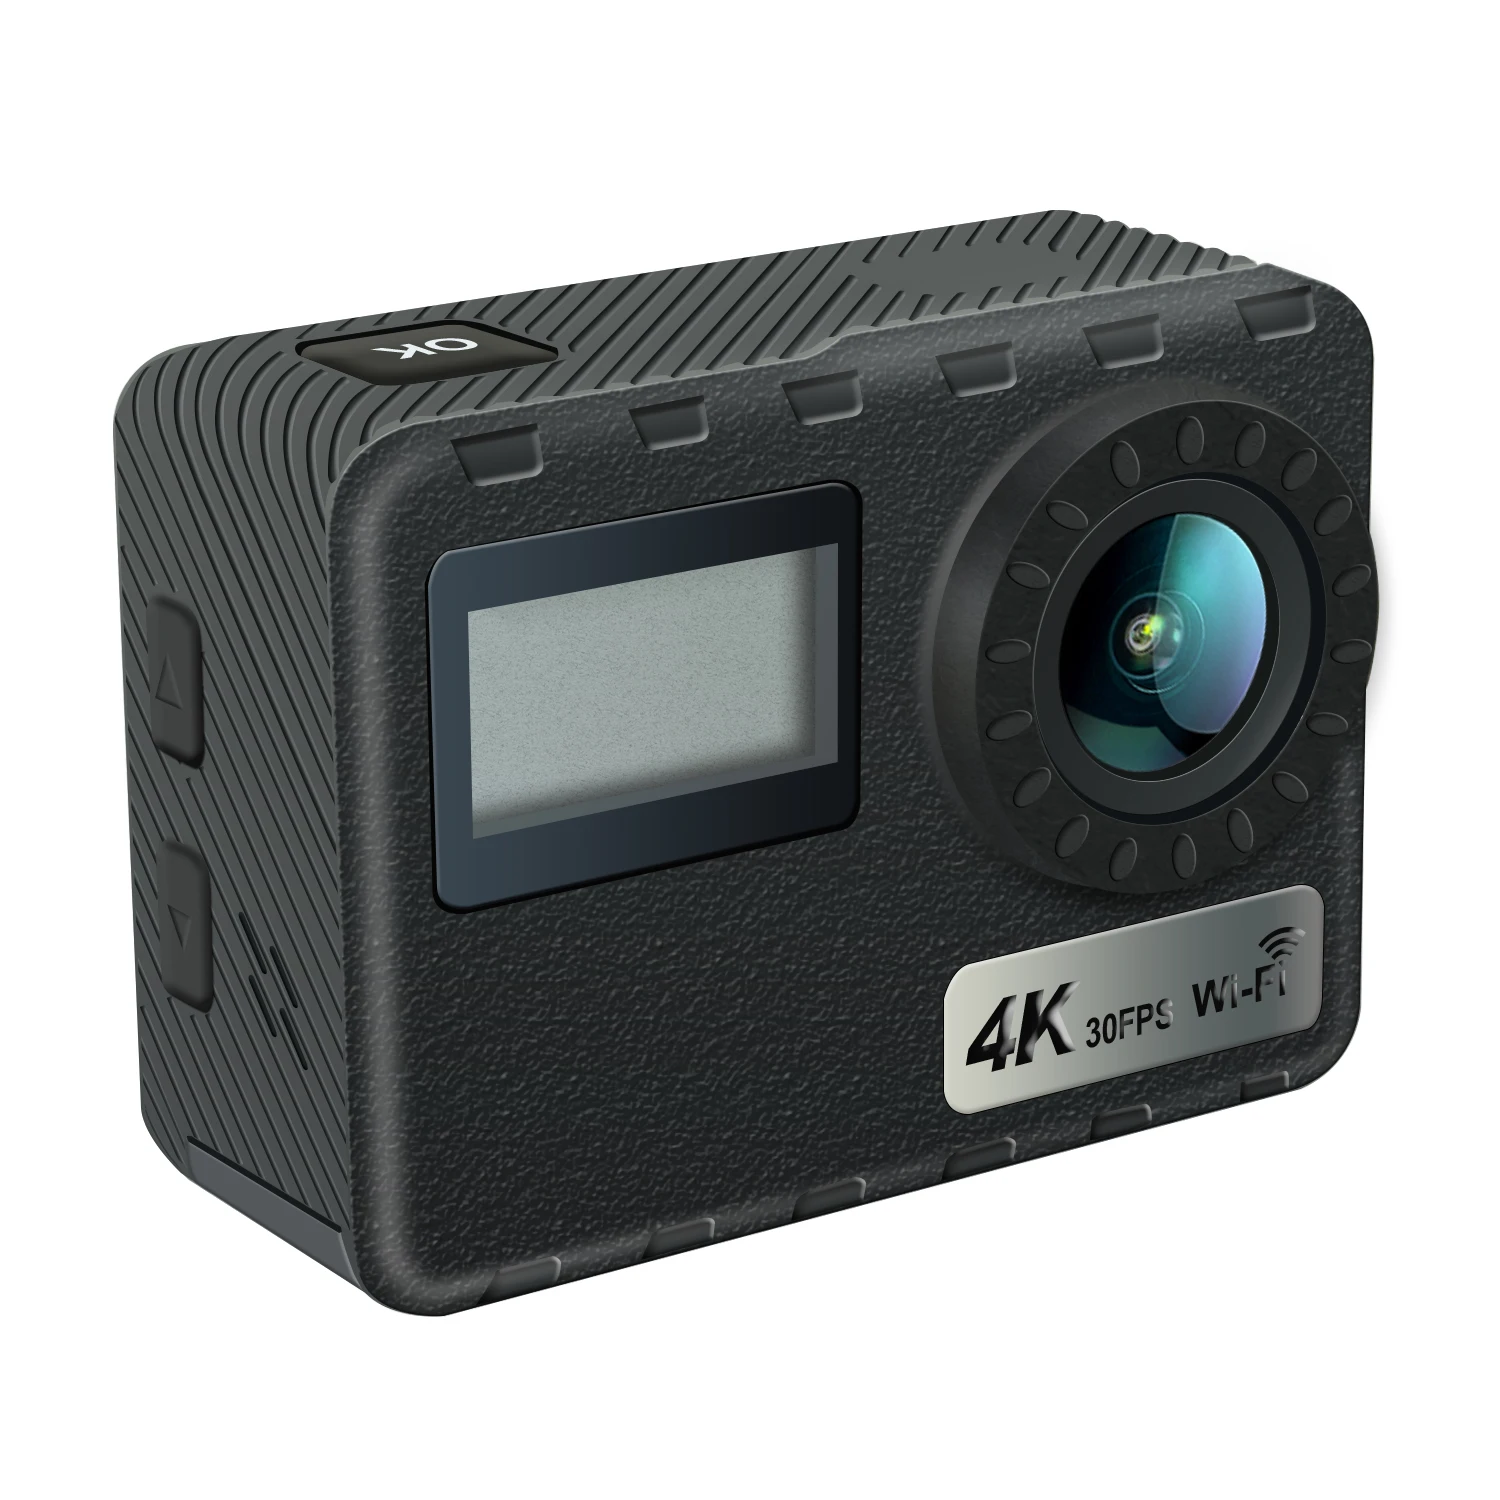 4K Dual Touch screen hd 720p sport camera with remote control